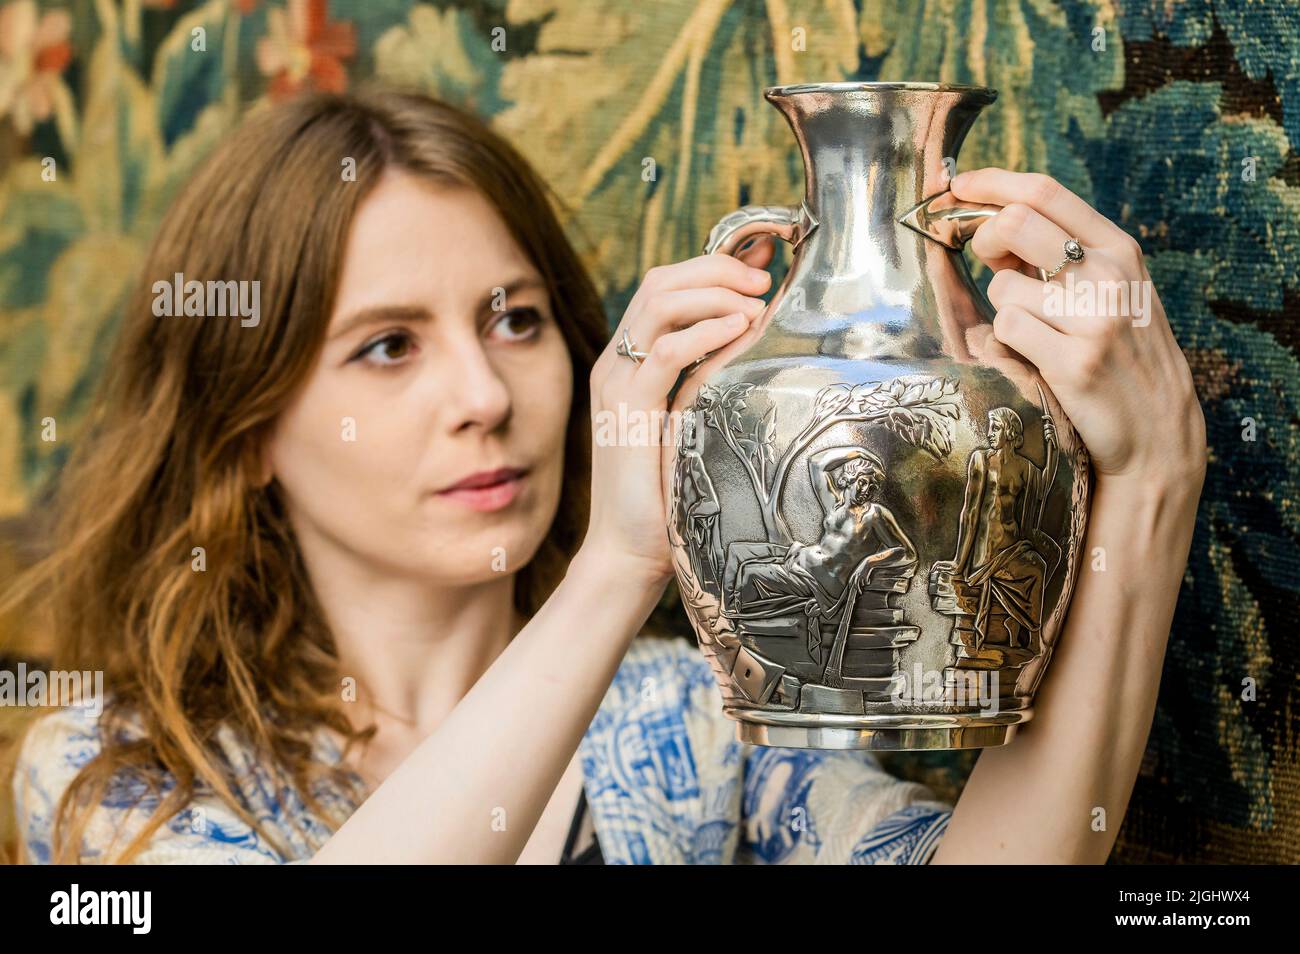 London, UK. 11th July, 2022. A silver copy of the Portland Vase Charles Reily & George Storer, London 1845, est £4,000 - £6,000 - The Grand Tour sale at Bonhams New Bond Street. The sale itself will take place on Thursday 14 July in London Credit: Guy Bell/Alamy Live News Stock Photo